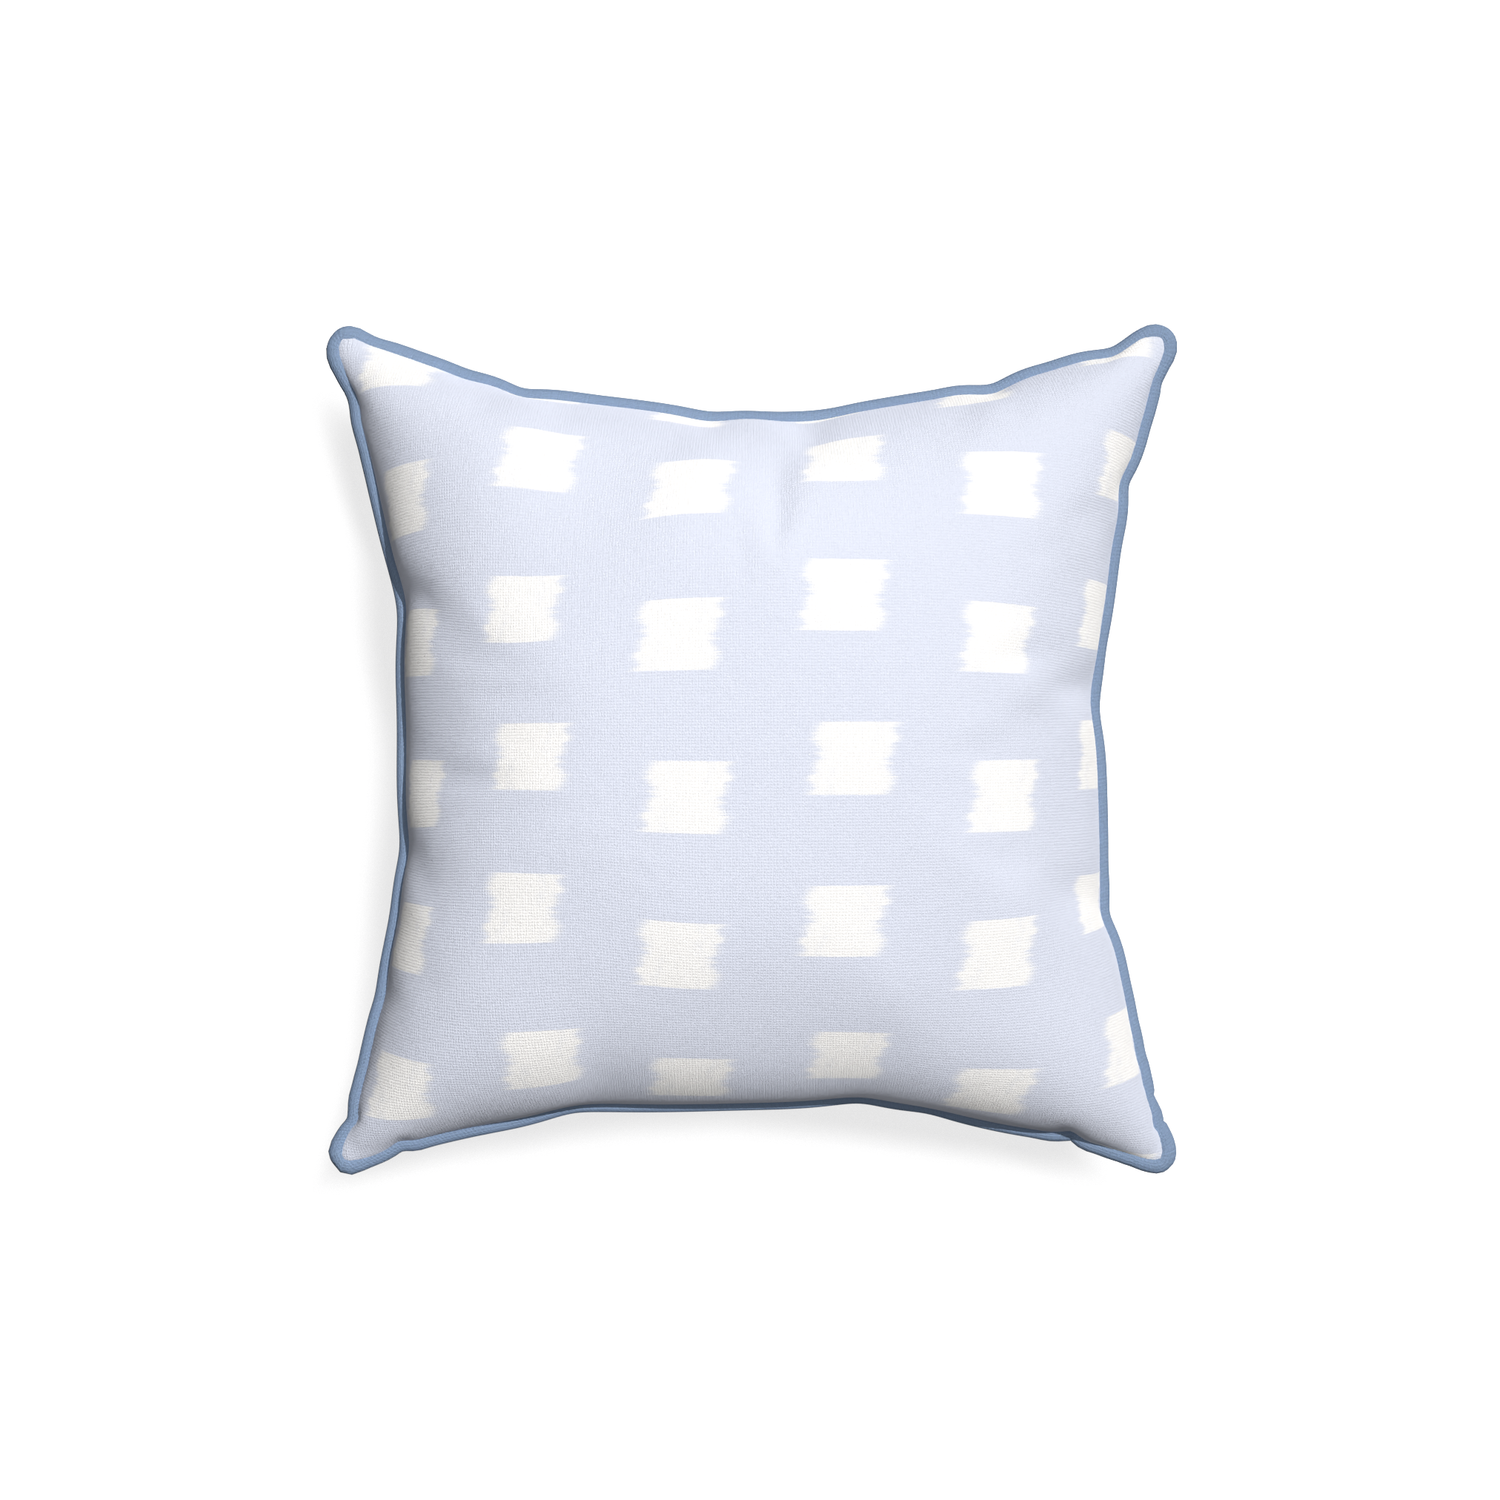 18-square denton custom sky blue patternpillow with sky piping on white background